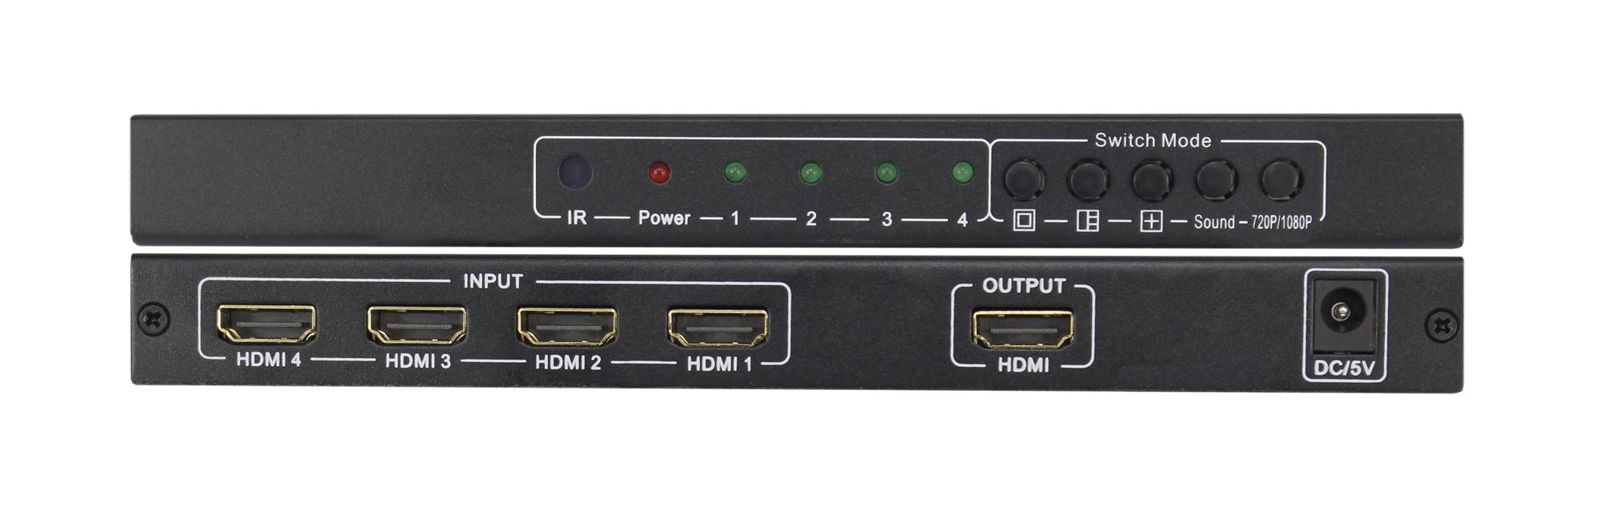 HDMI Quad multiviewer HDMI switch 4x1 with seamless switch 3